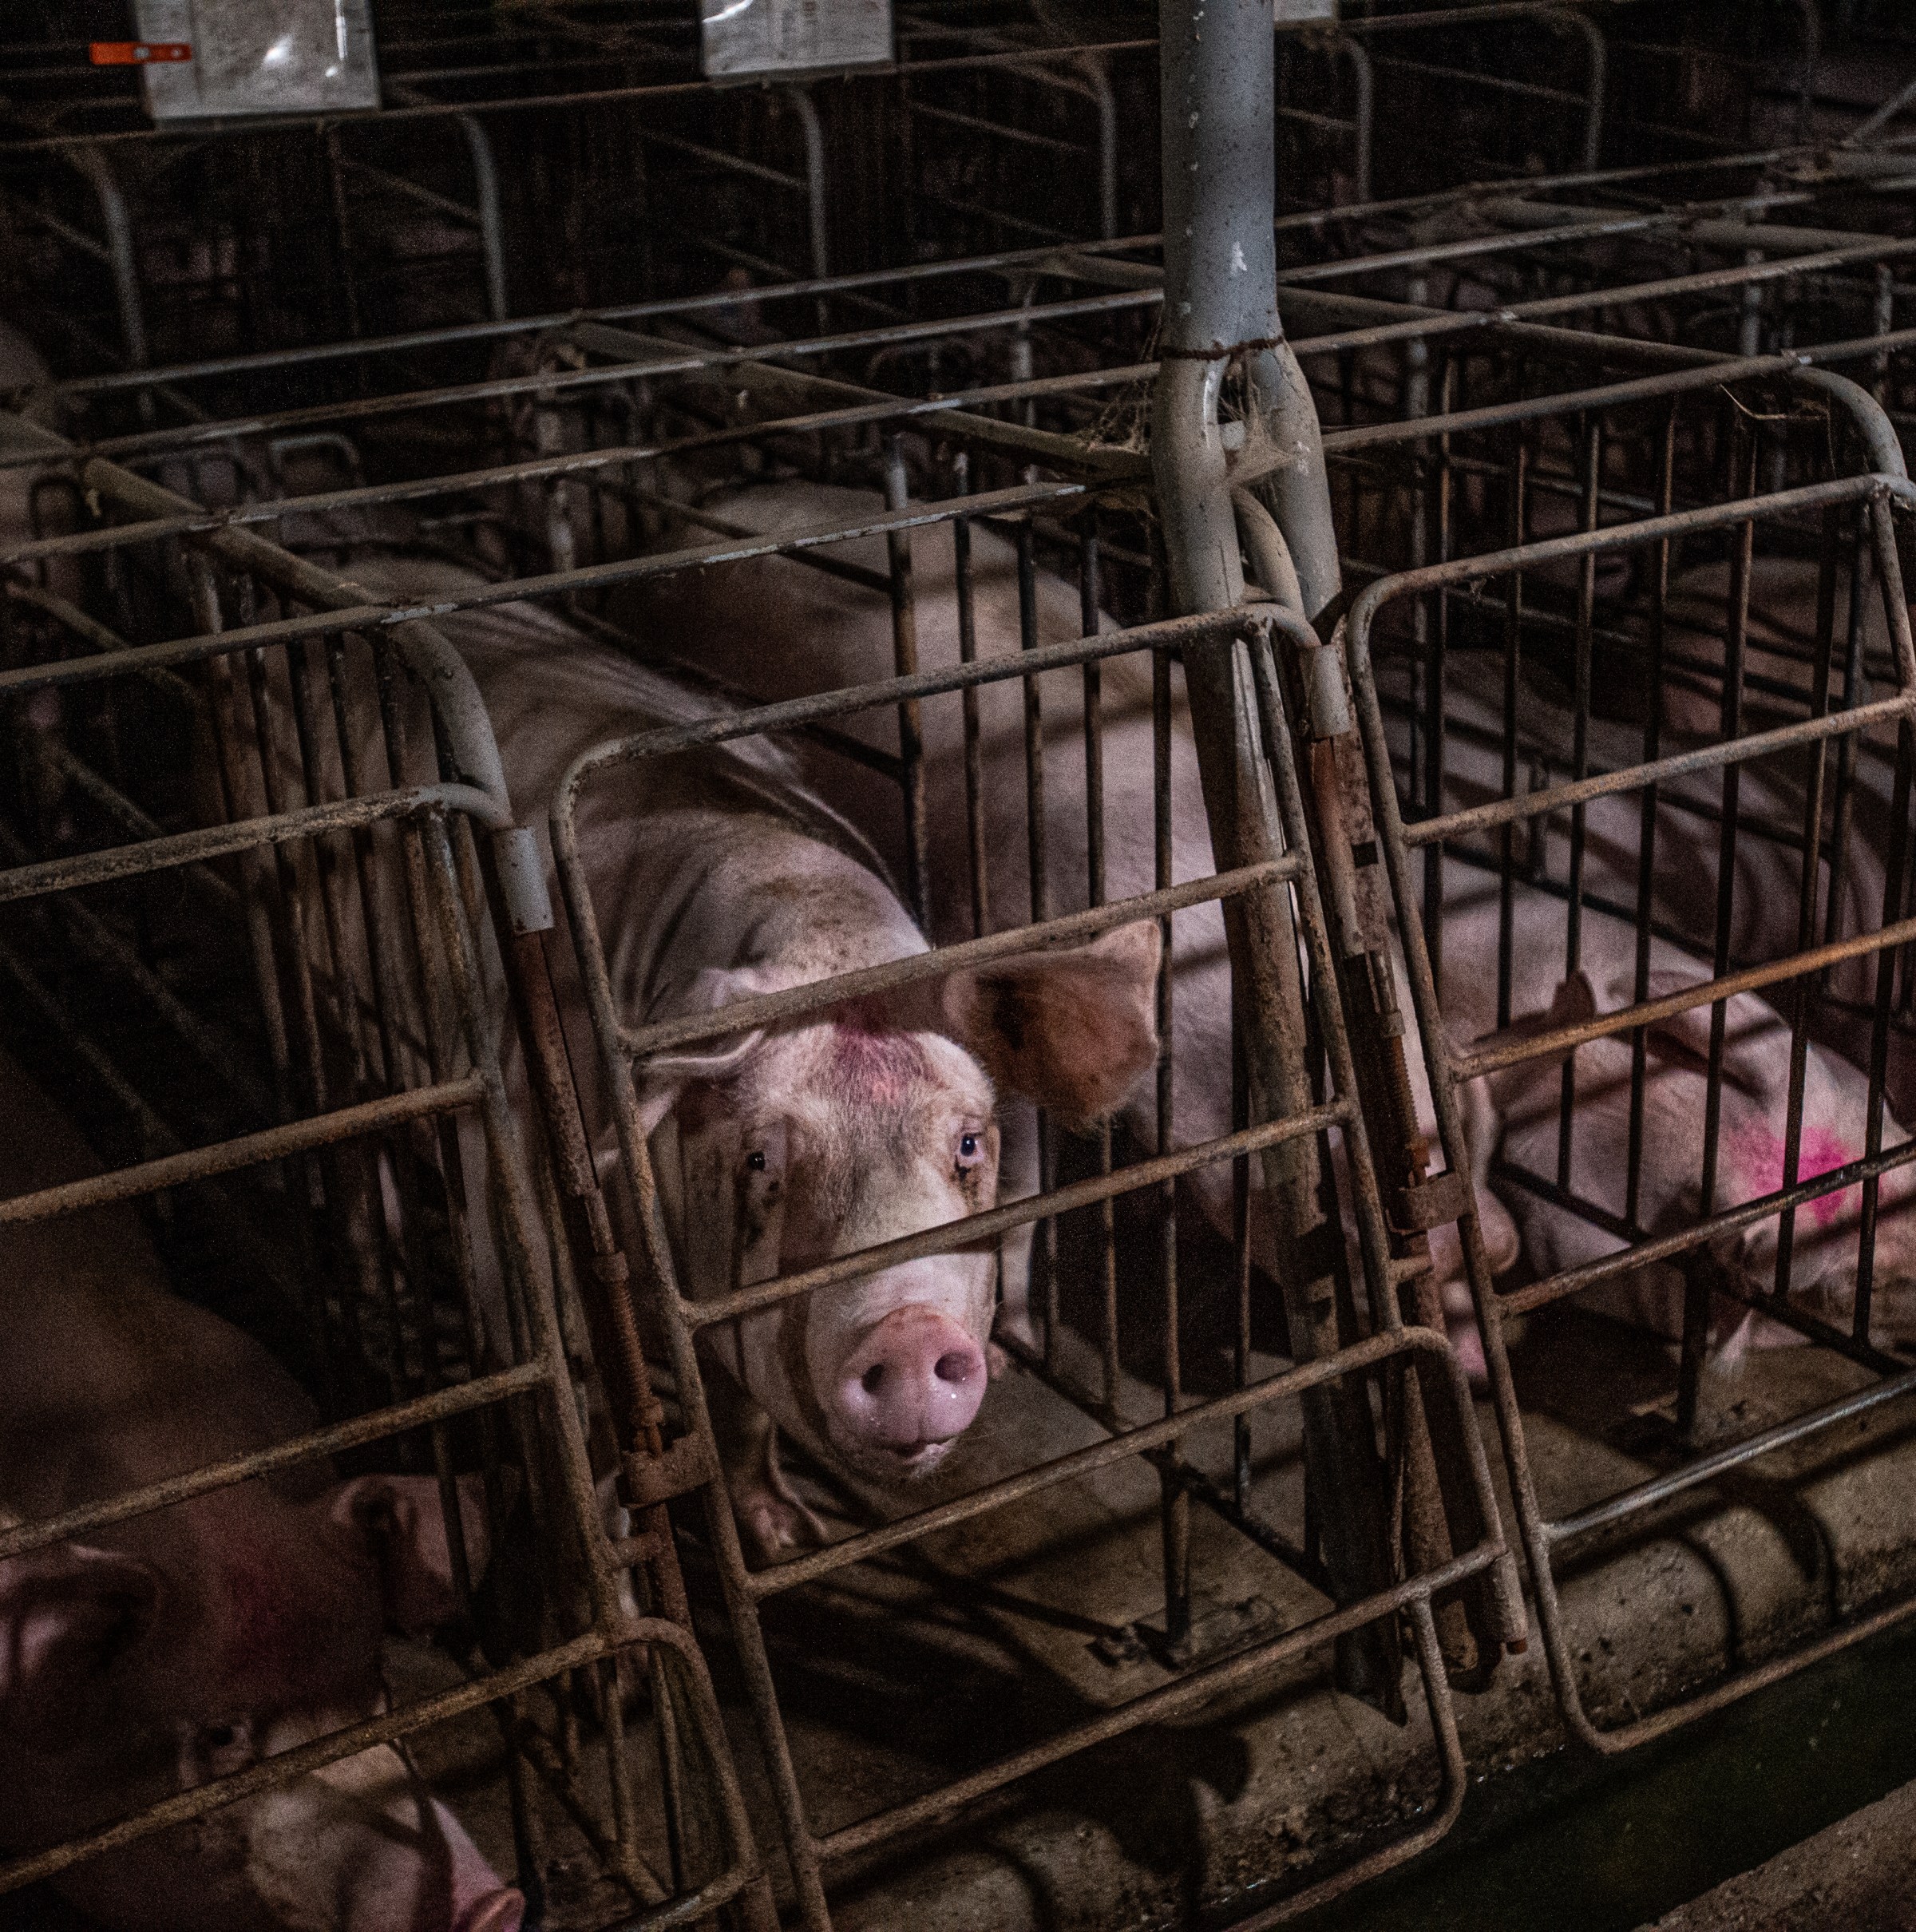 Republicans want to put pigs back in tiny cages. Again.